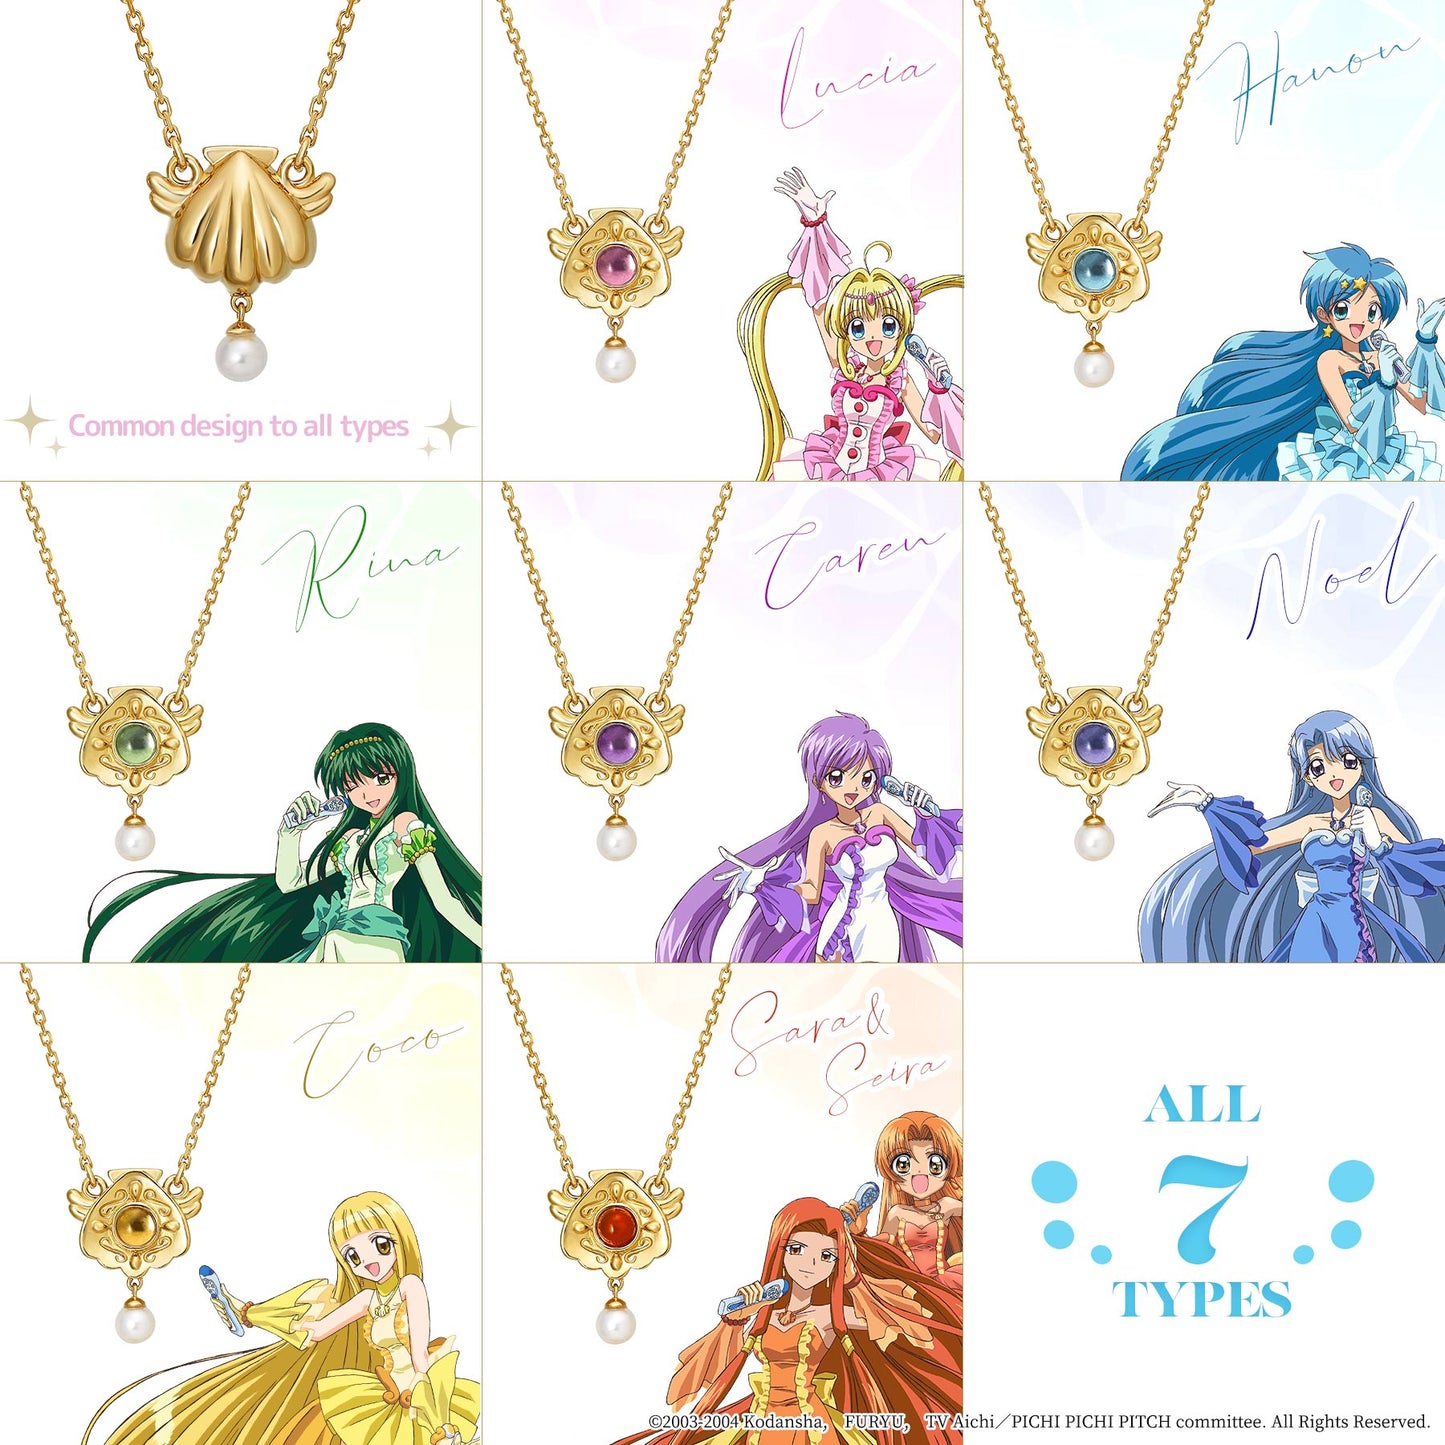 Mermaid Melody Pichi Pichi Pitch - Reversible Necklace (Noel) - All Characters